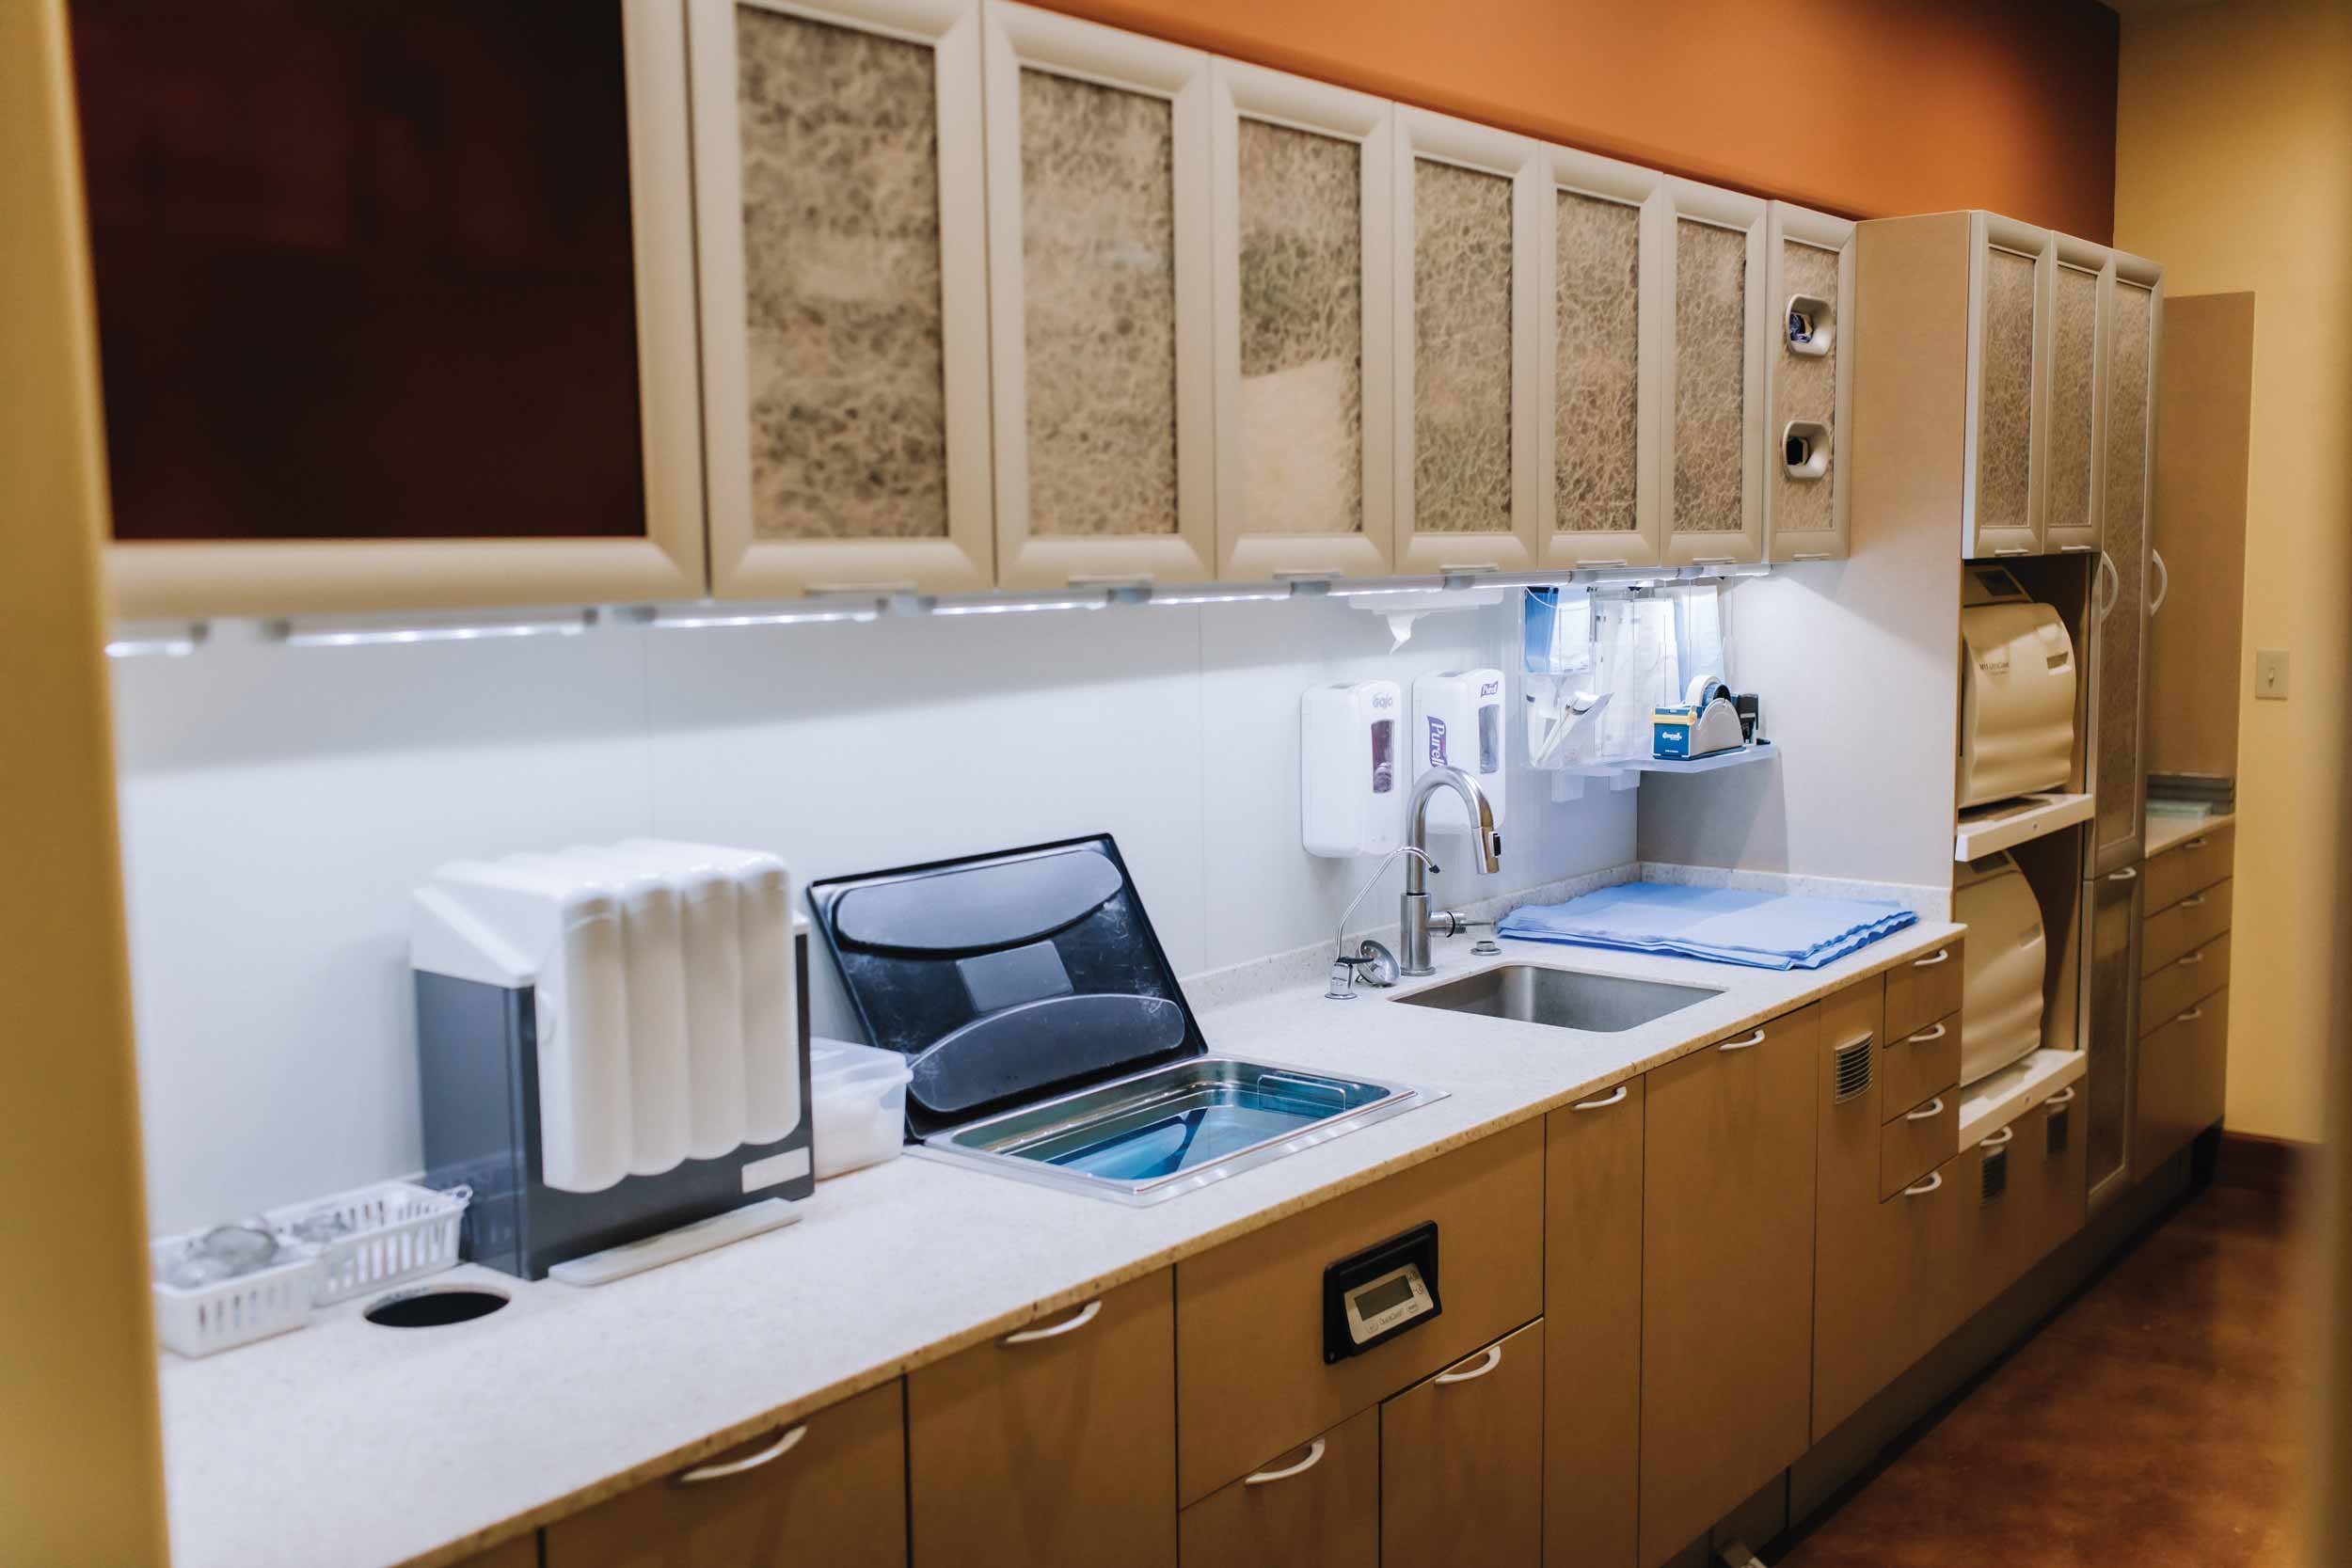 The Sterilization Center, at the heart of the Broken Arrow practice, continues the Santa Fe inspiration echoing the clay paint color on the wall and the natural textures in the upper cabinets.